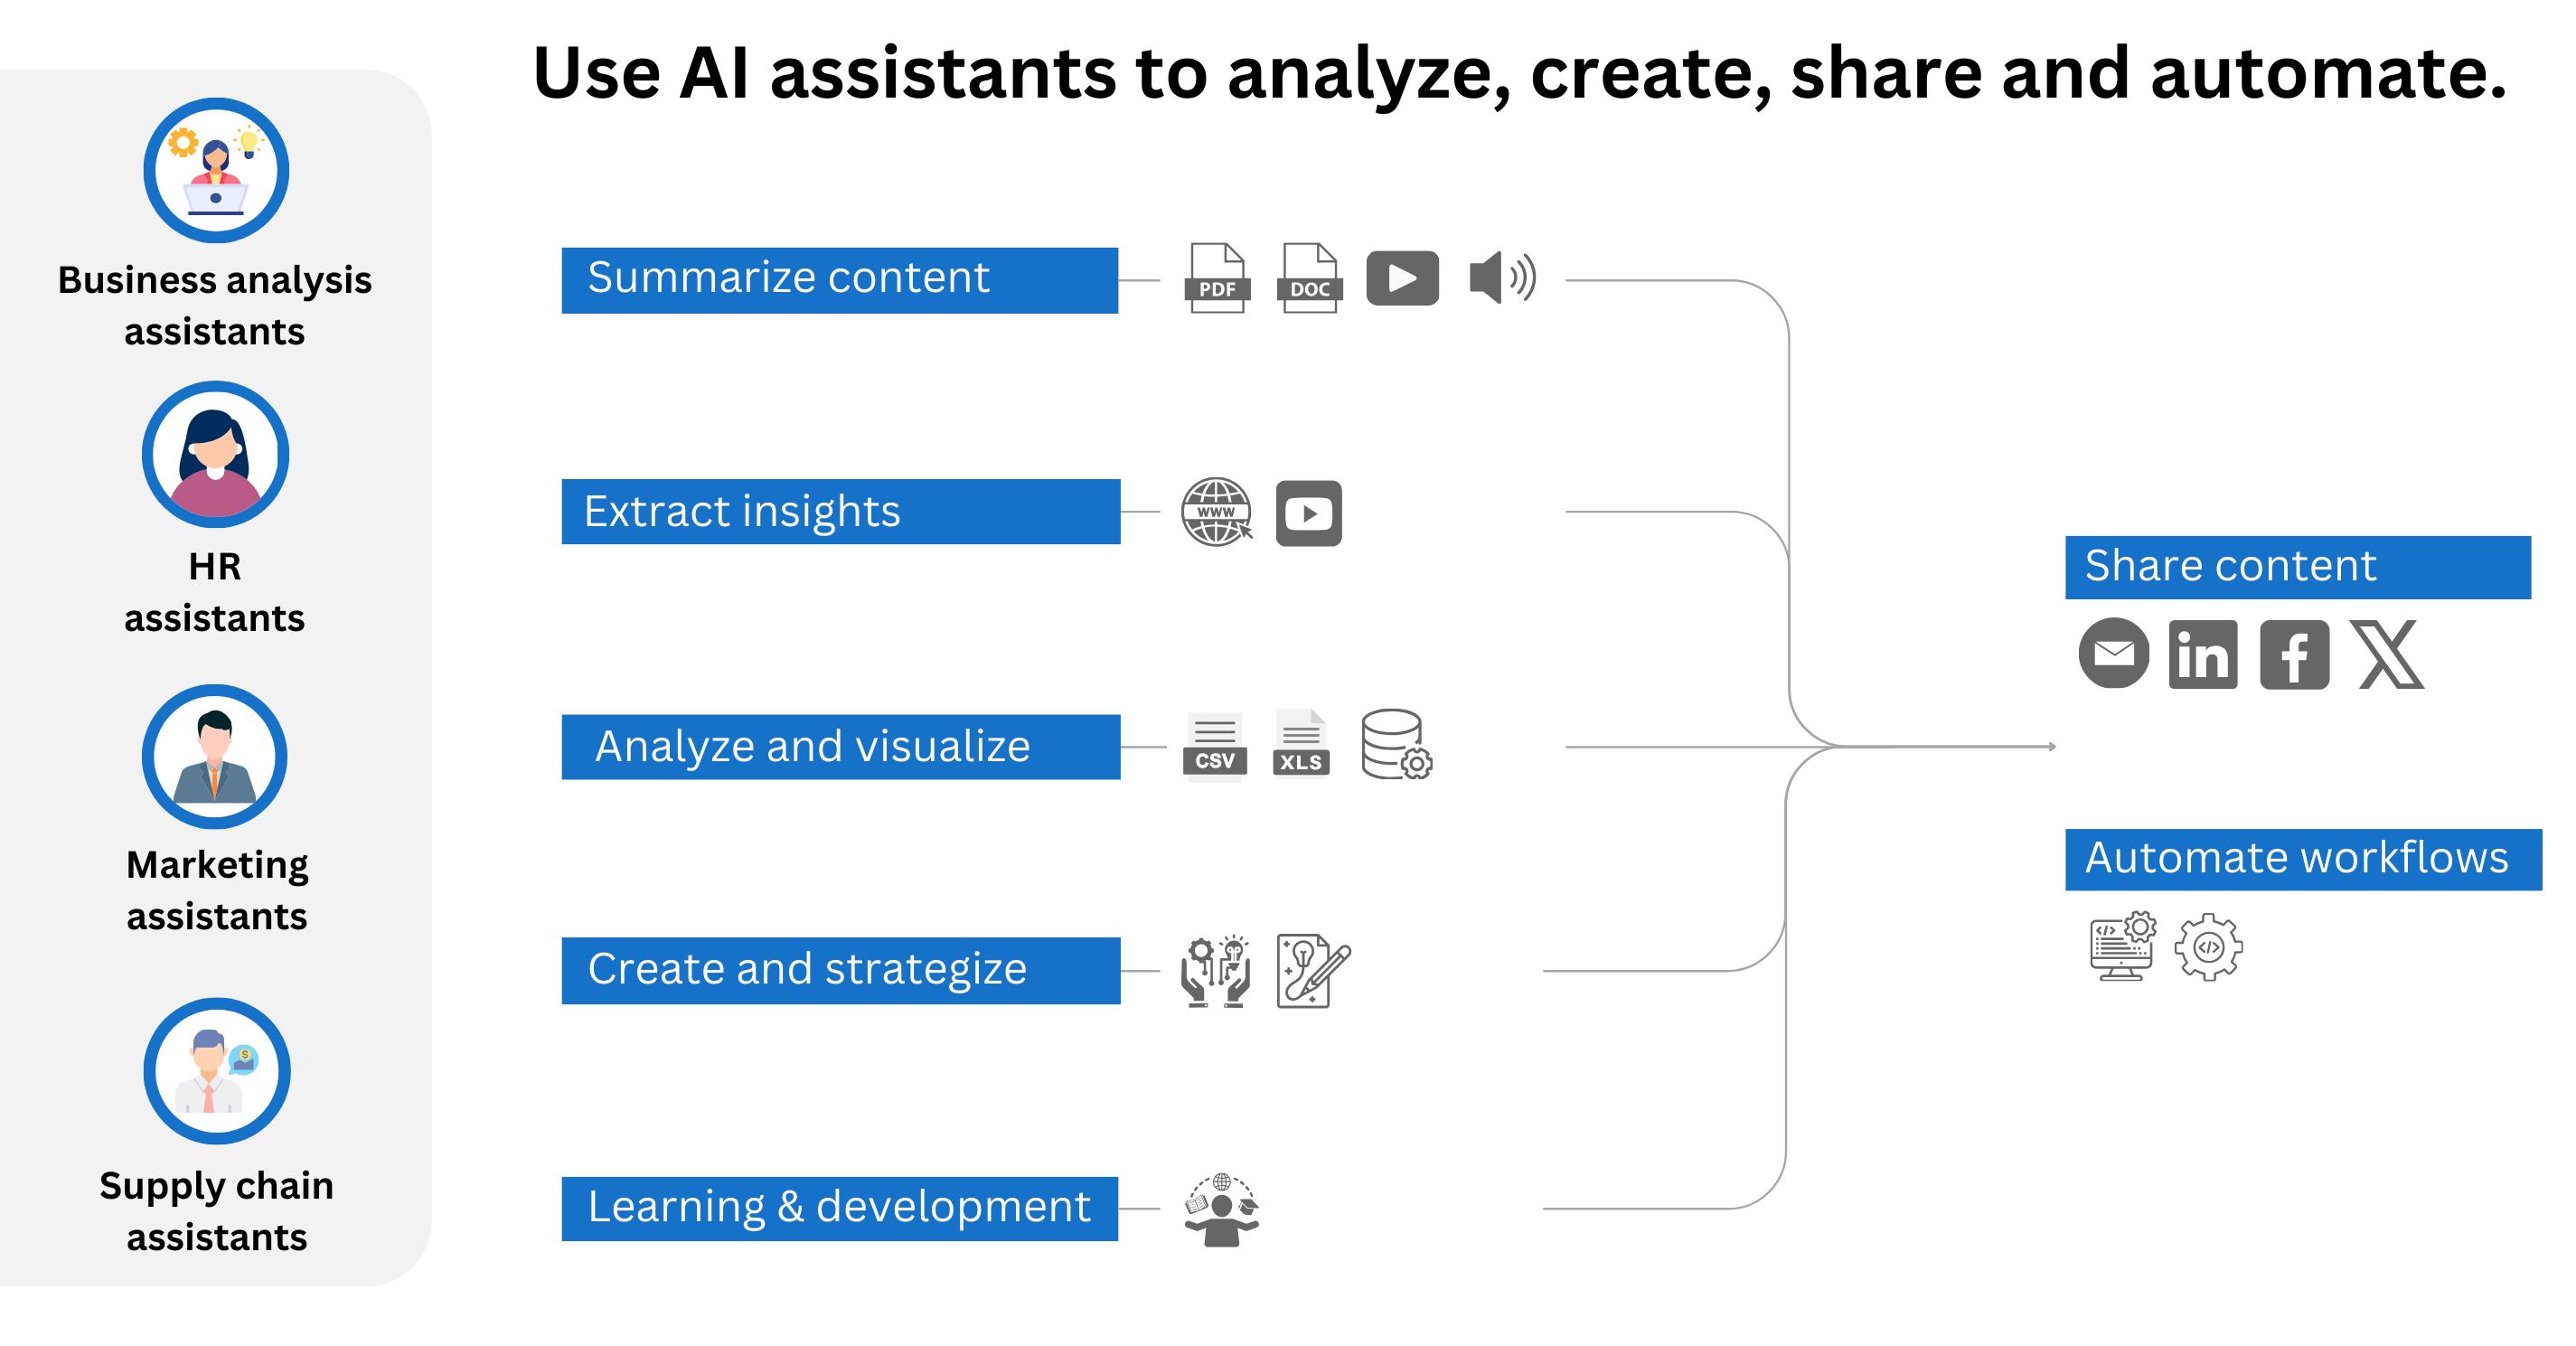 use of AI Assistants in business: ask documents, chat pdf, summarize content, extract insights, analyze data, create content, share content via social platforms